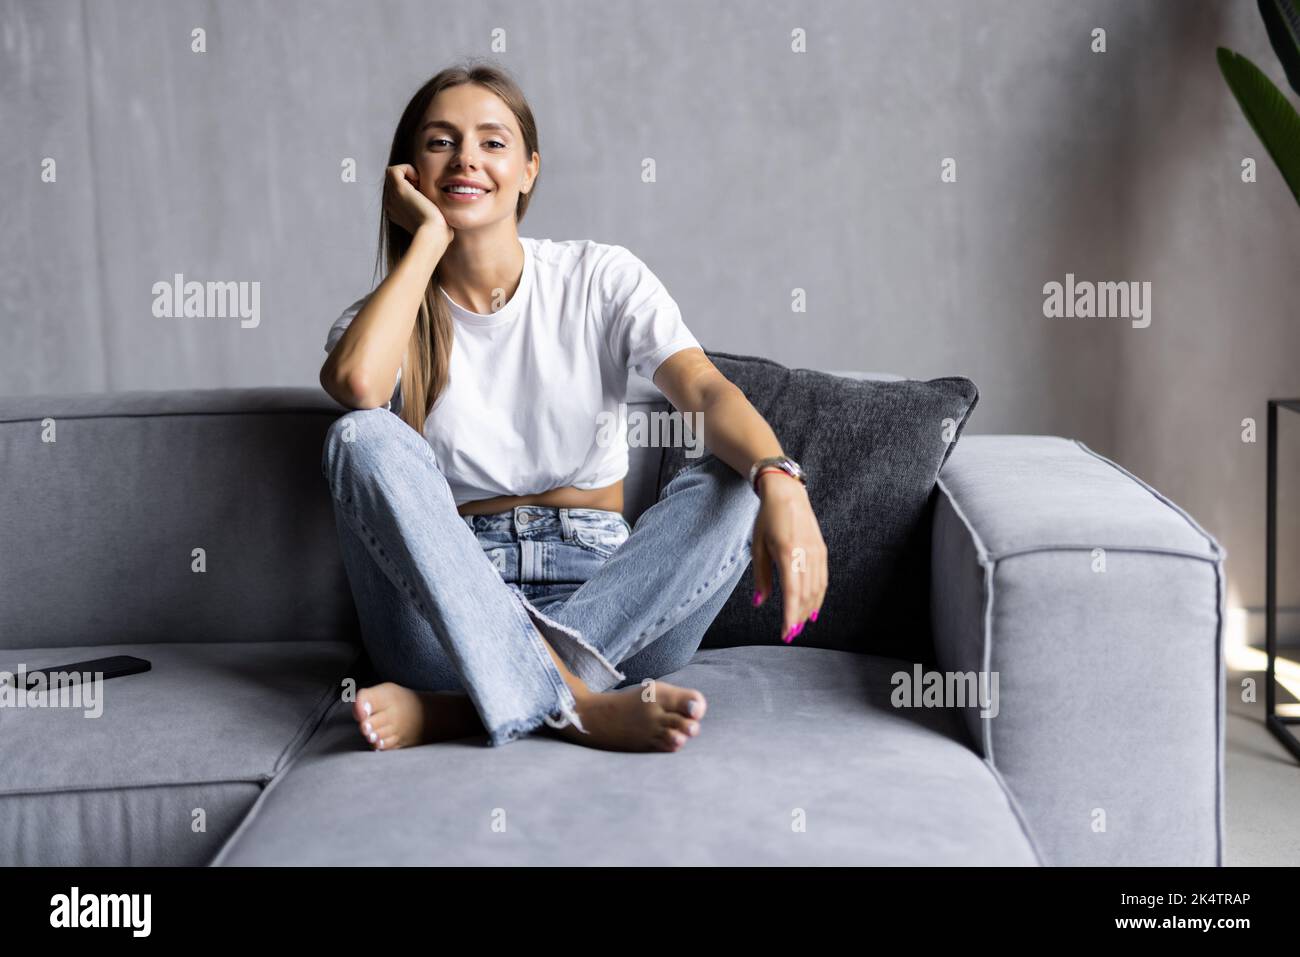 Beauty woman with white perfect smile looking at camera at home Stock Photo